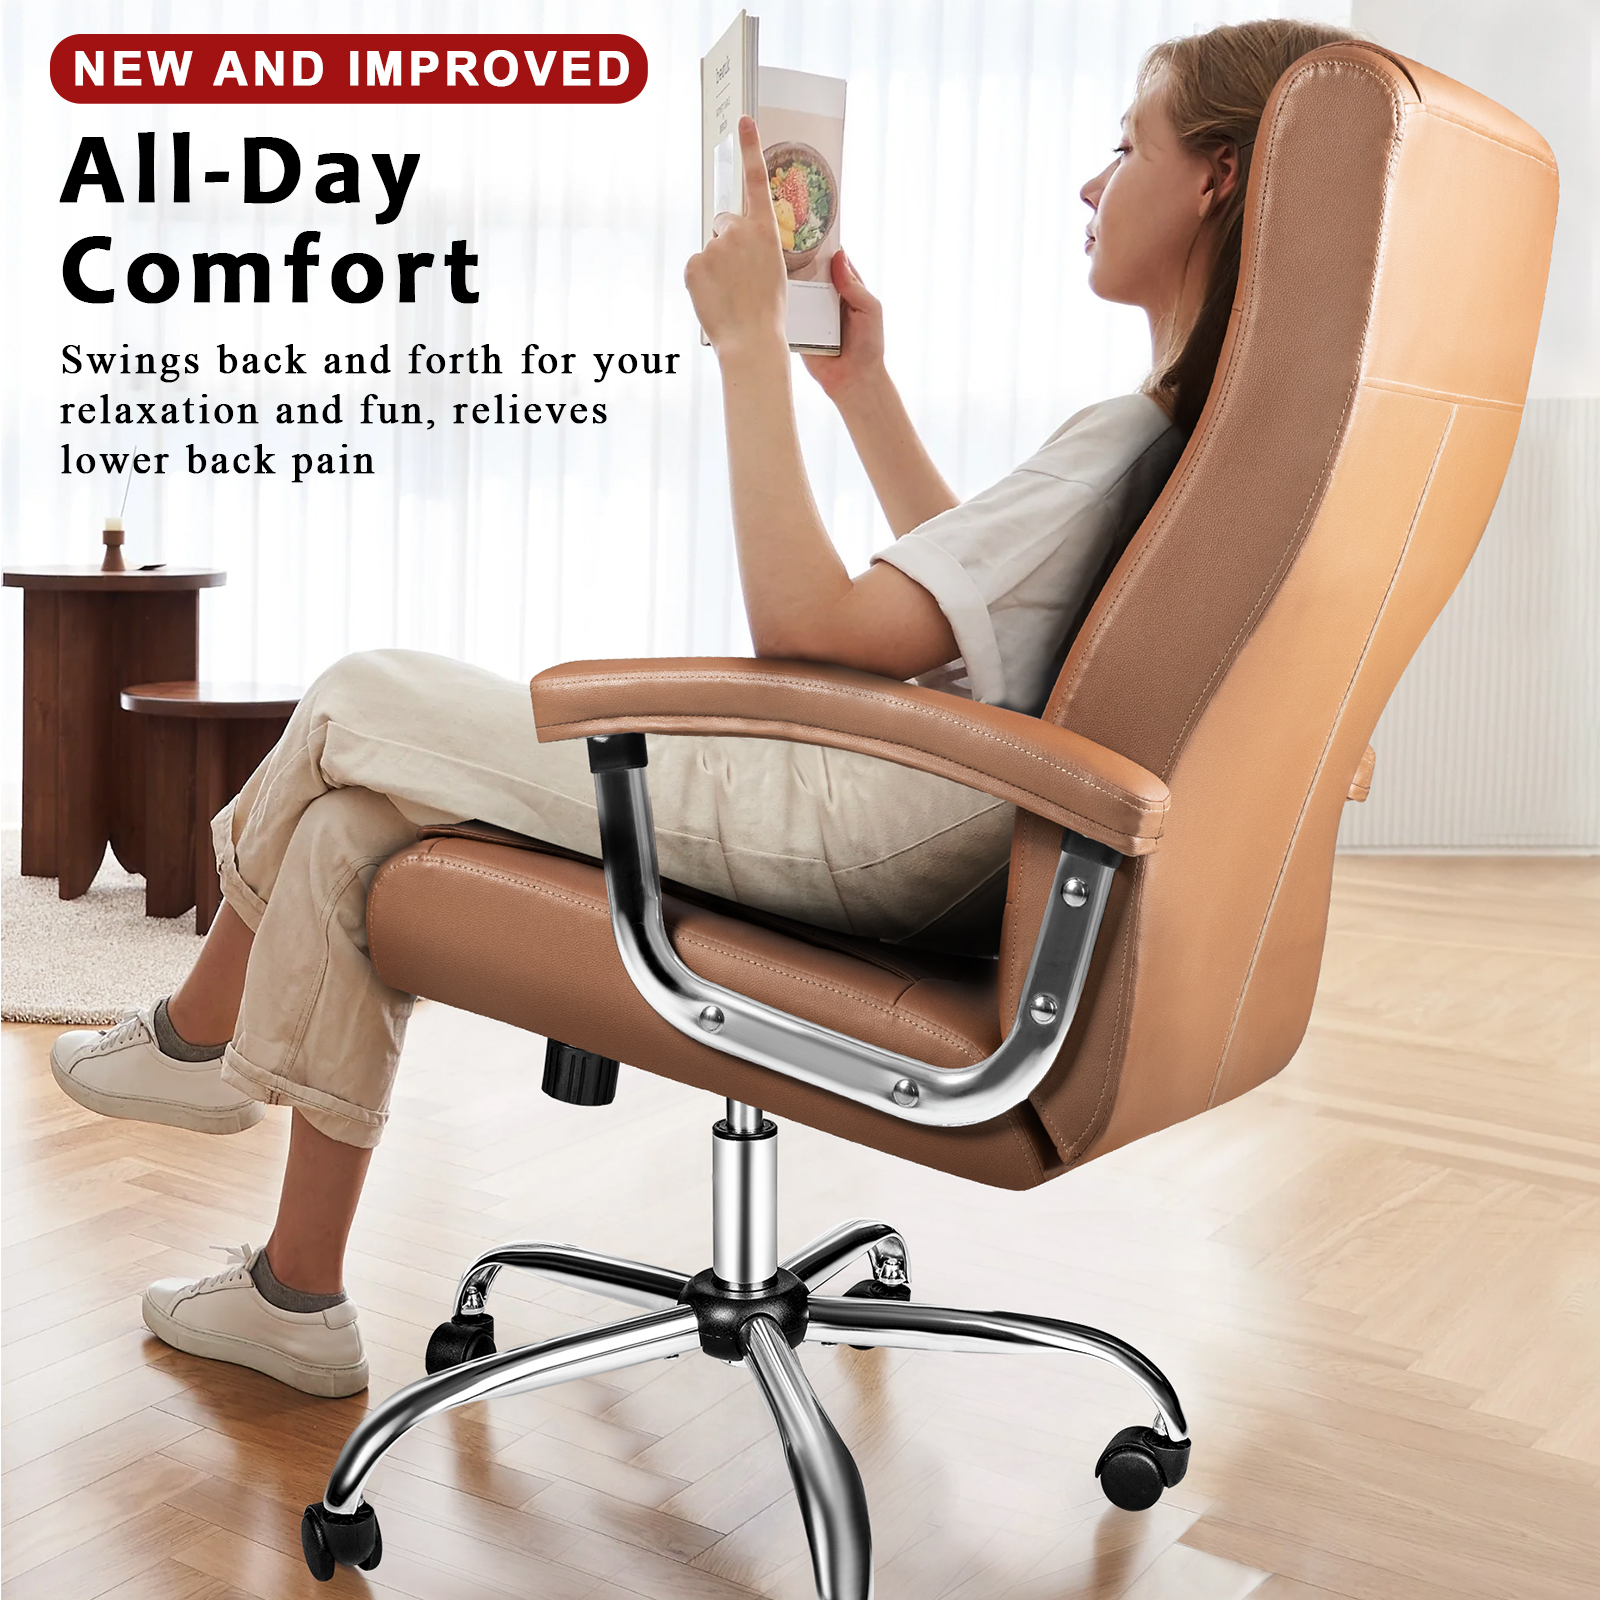 Waleaf Office Chair with Spring Cushion,400LBS High Back Computer Chair with Padded Armrest, Khaki - image 4 of 7